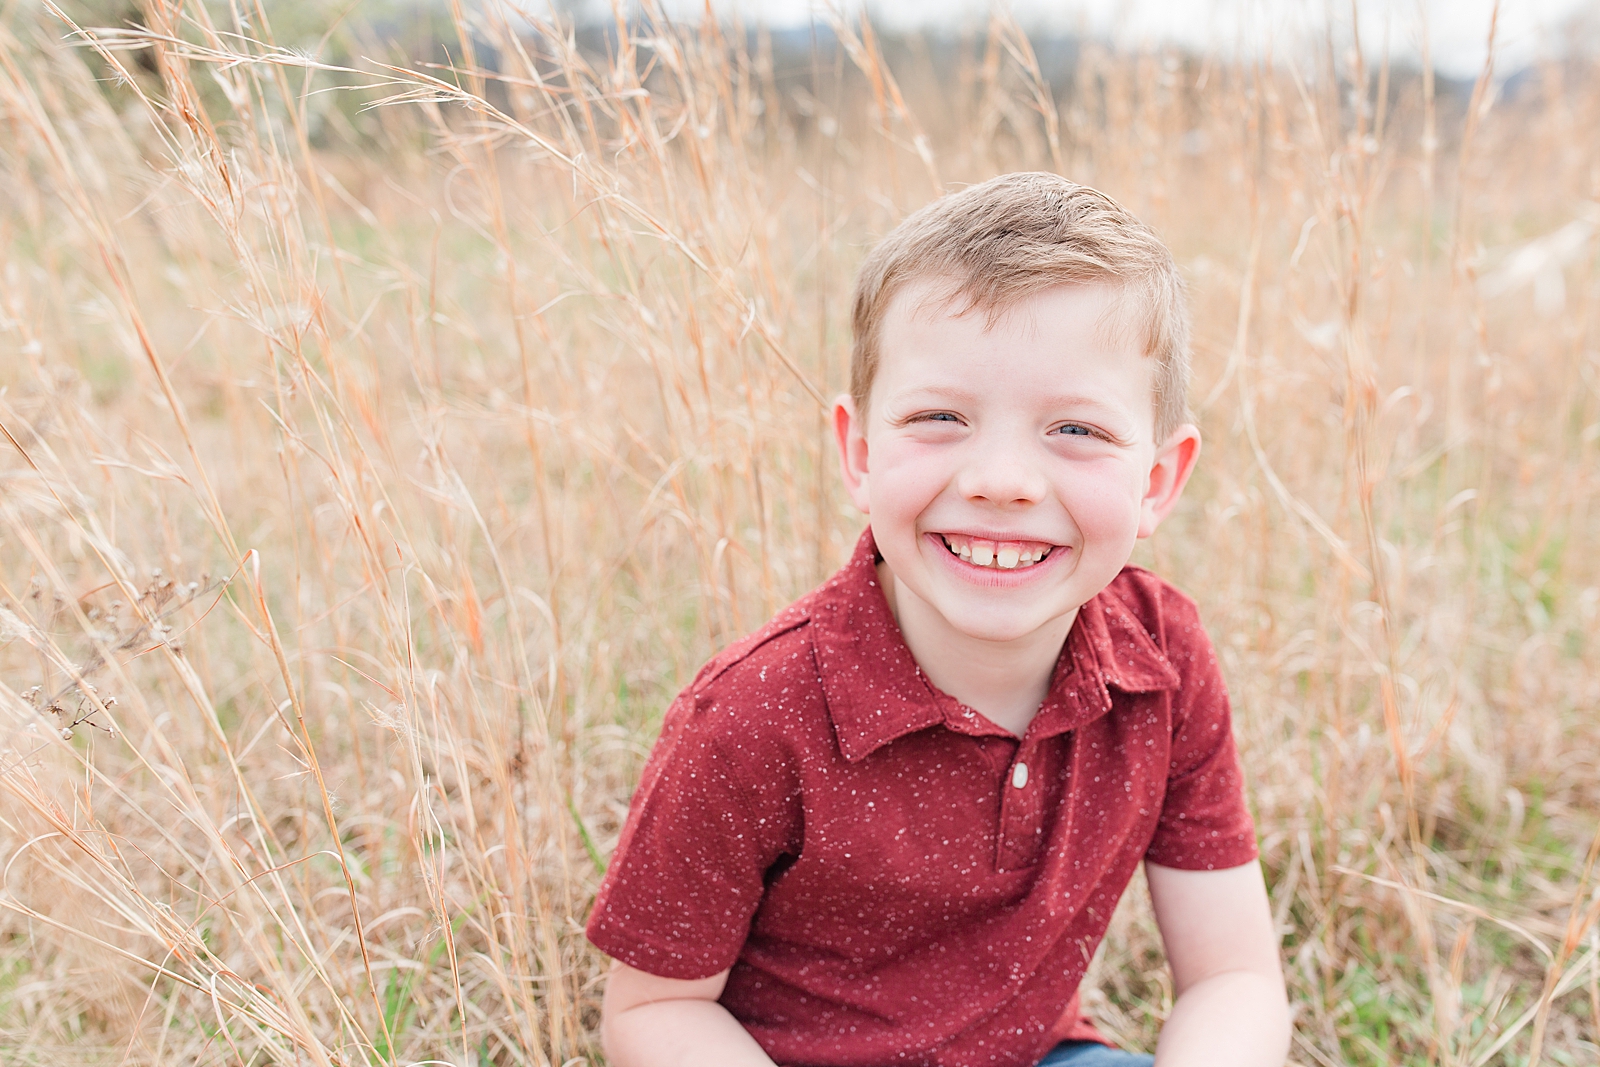 Asheville Photographer's Family Handsome little boy in red shirt smiling at camera Photo